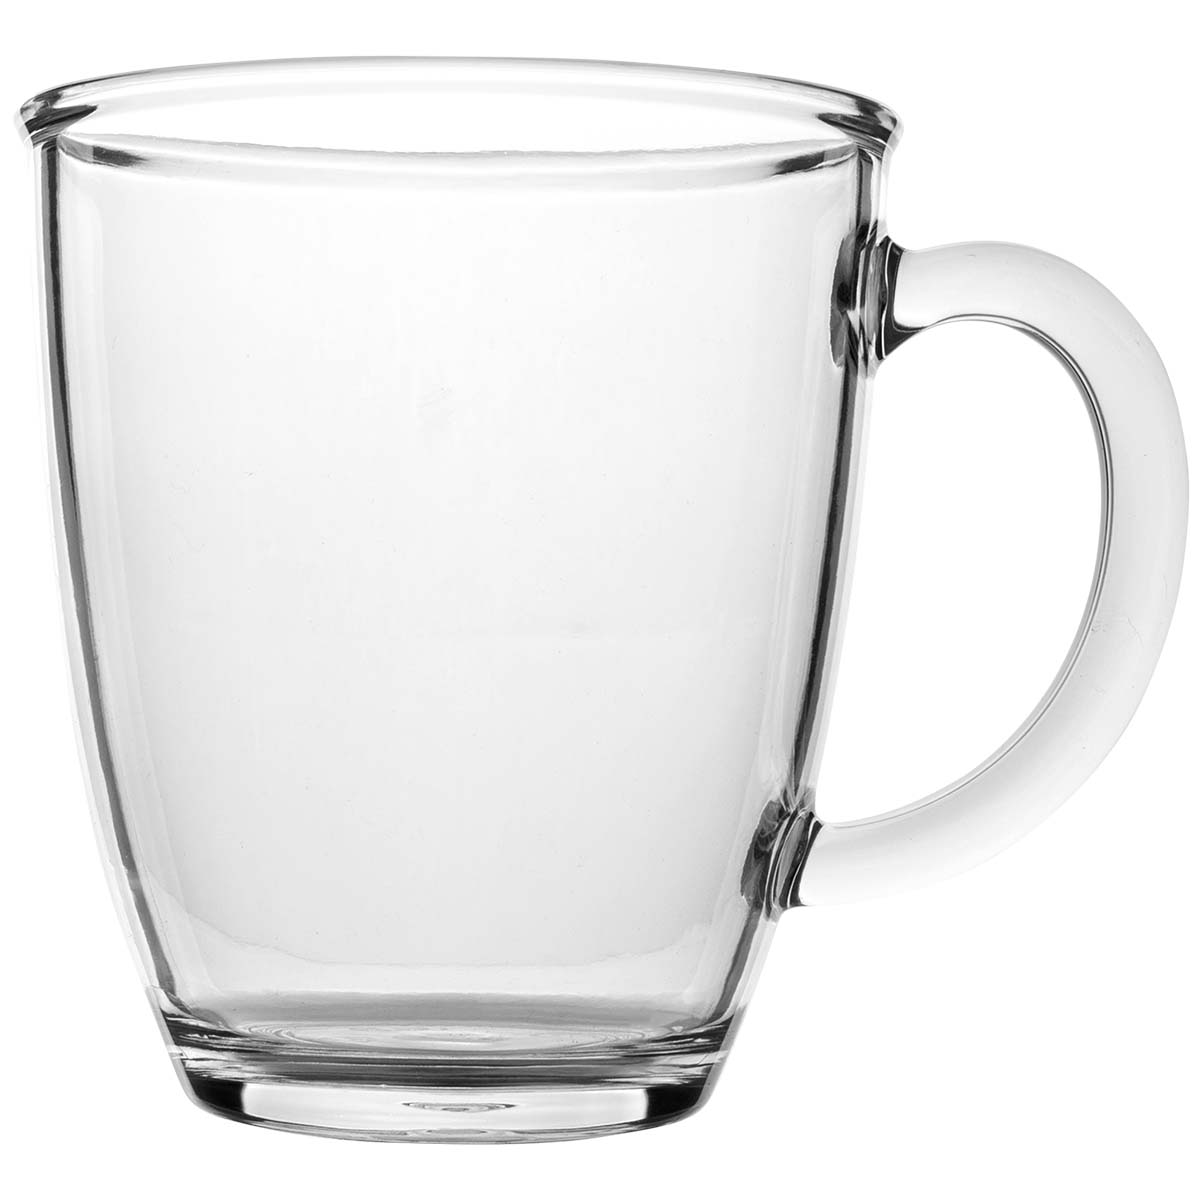 6101484 An extra strong and almost unbreakable tea glass. This luxurious tea glass is made from 100% polycarbonate and is therefore scratch-resistant, unbreakable and dishwasher safe. The glass has a conical shape and a sturdy handle.